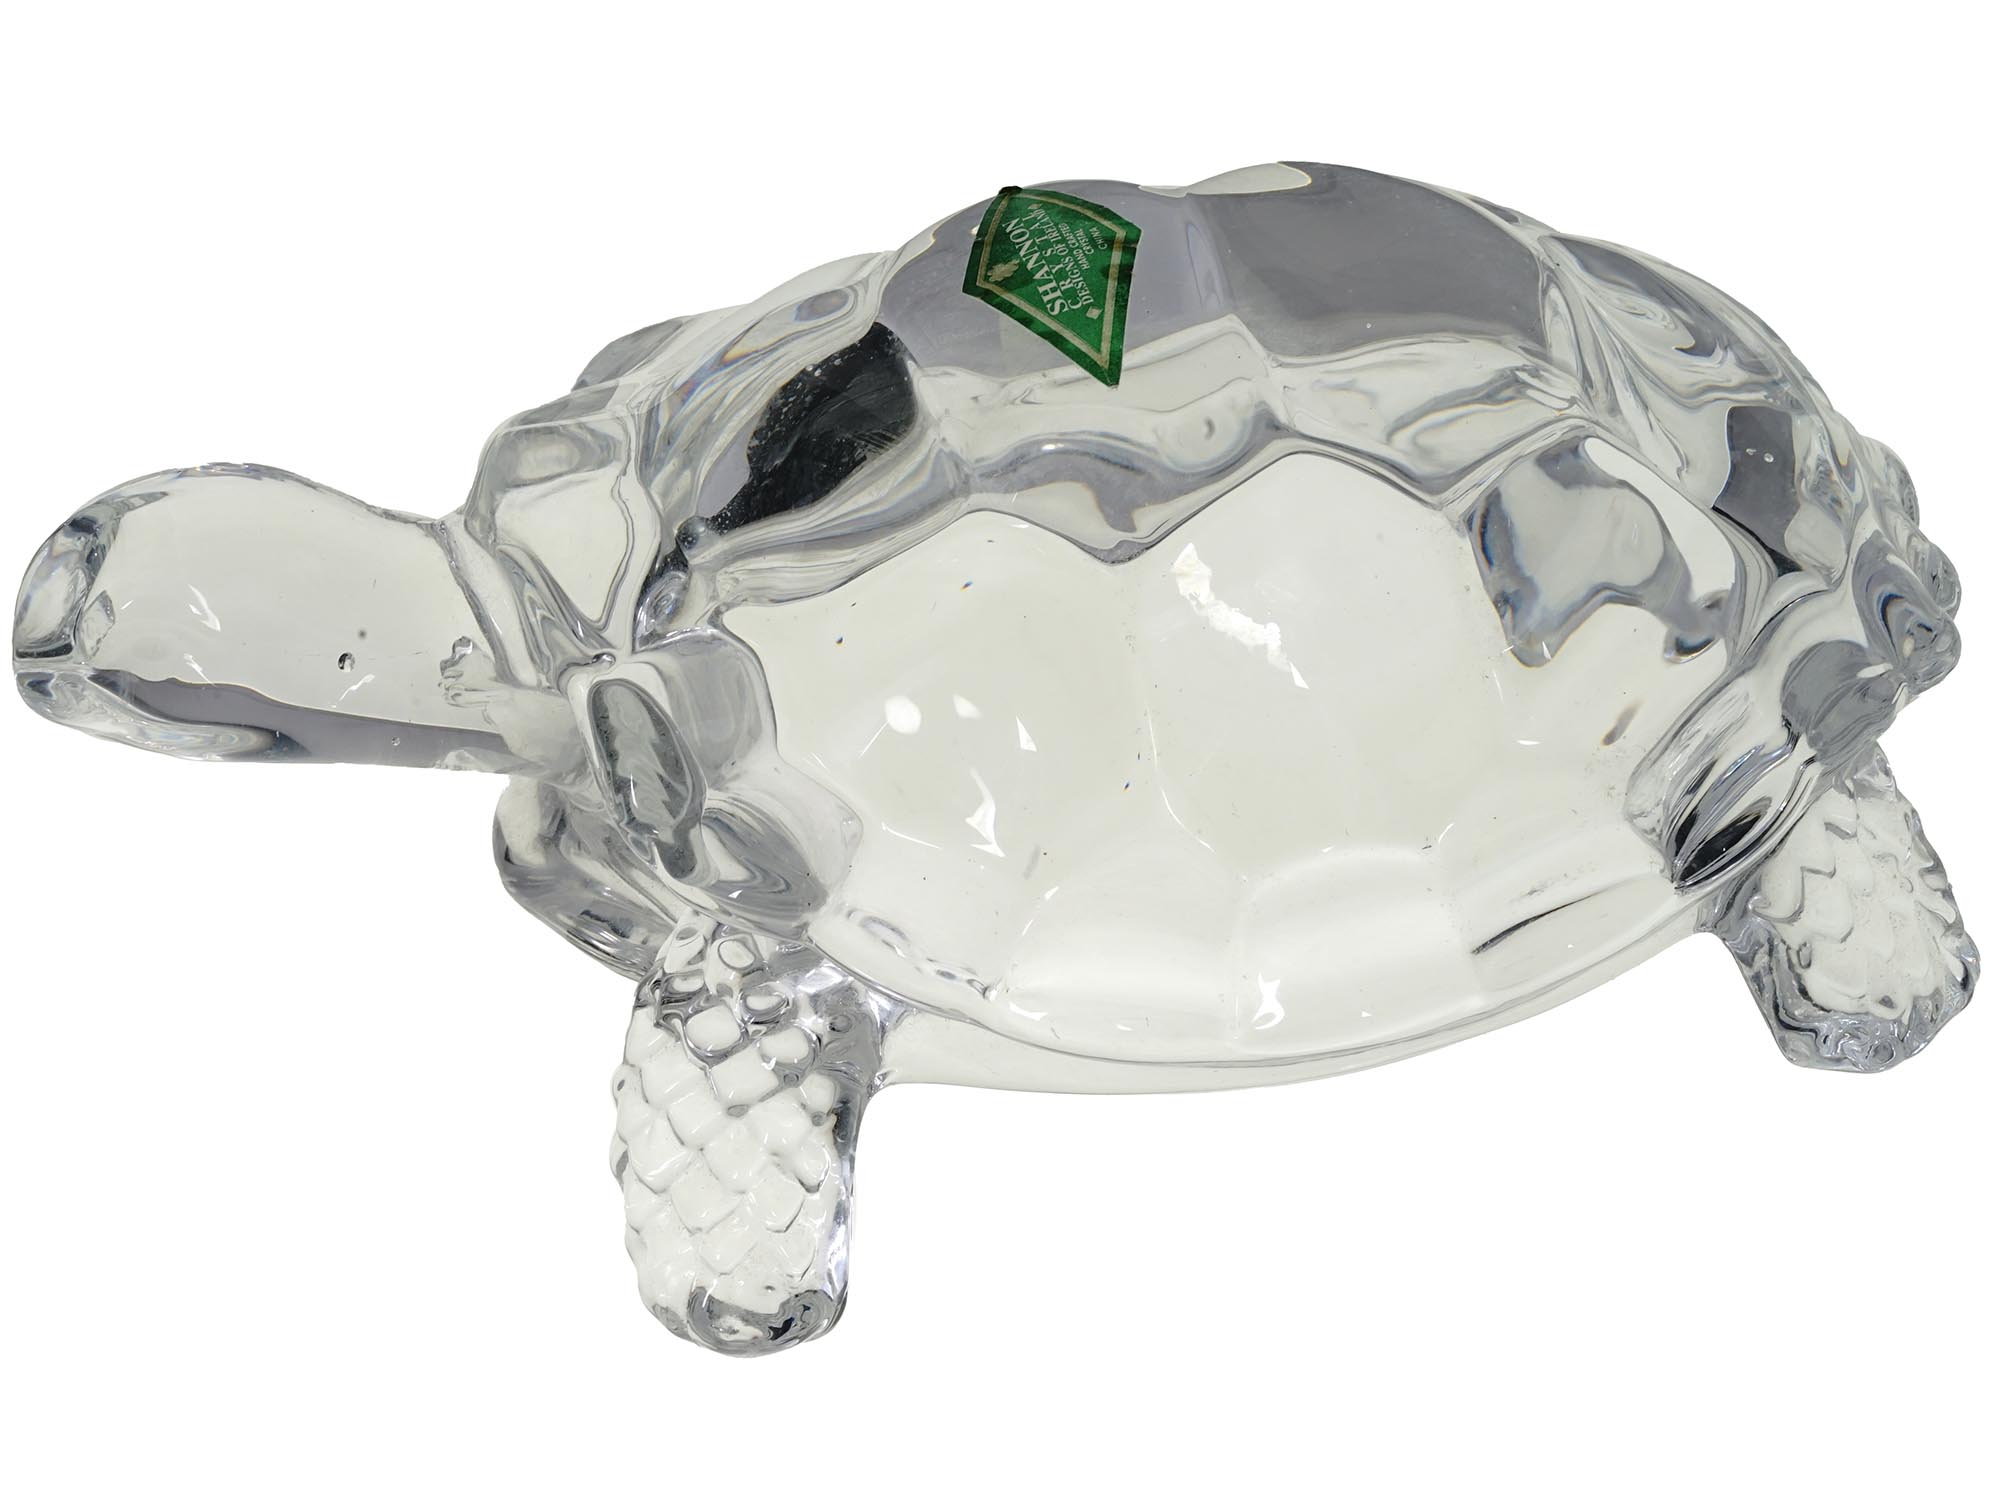 CHINESE SHANNON CRYSTAL GLASS FIGURINE OF TURTLE PIC-1